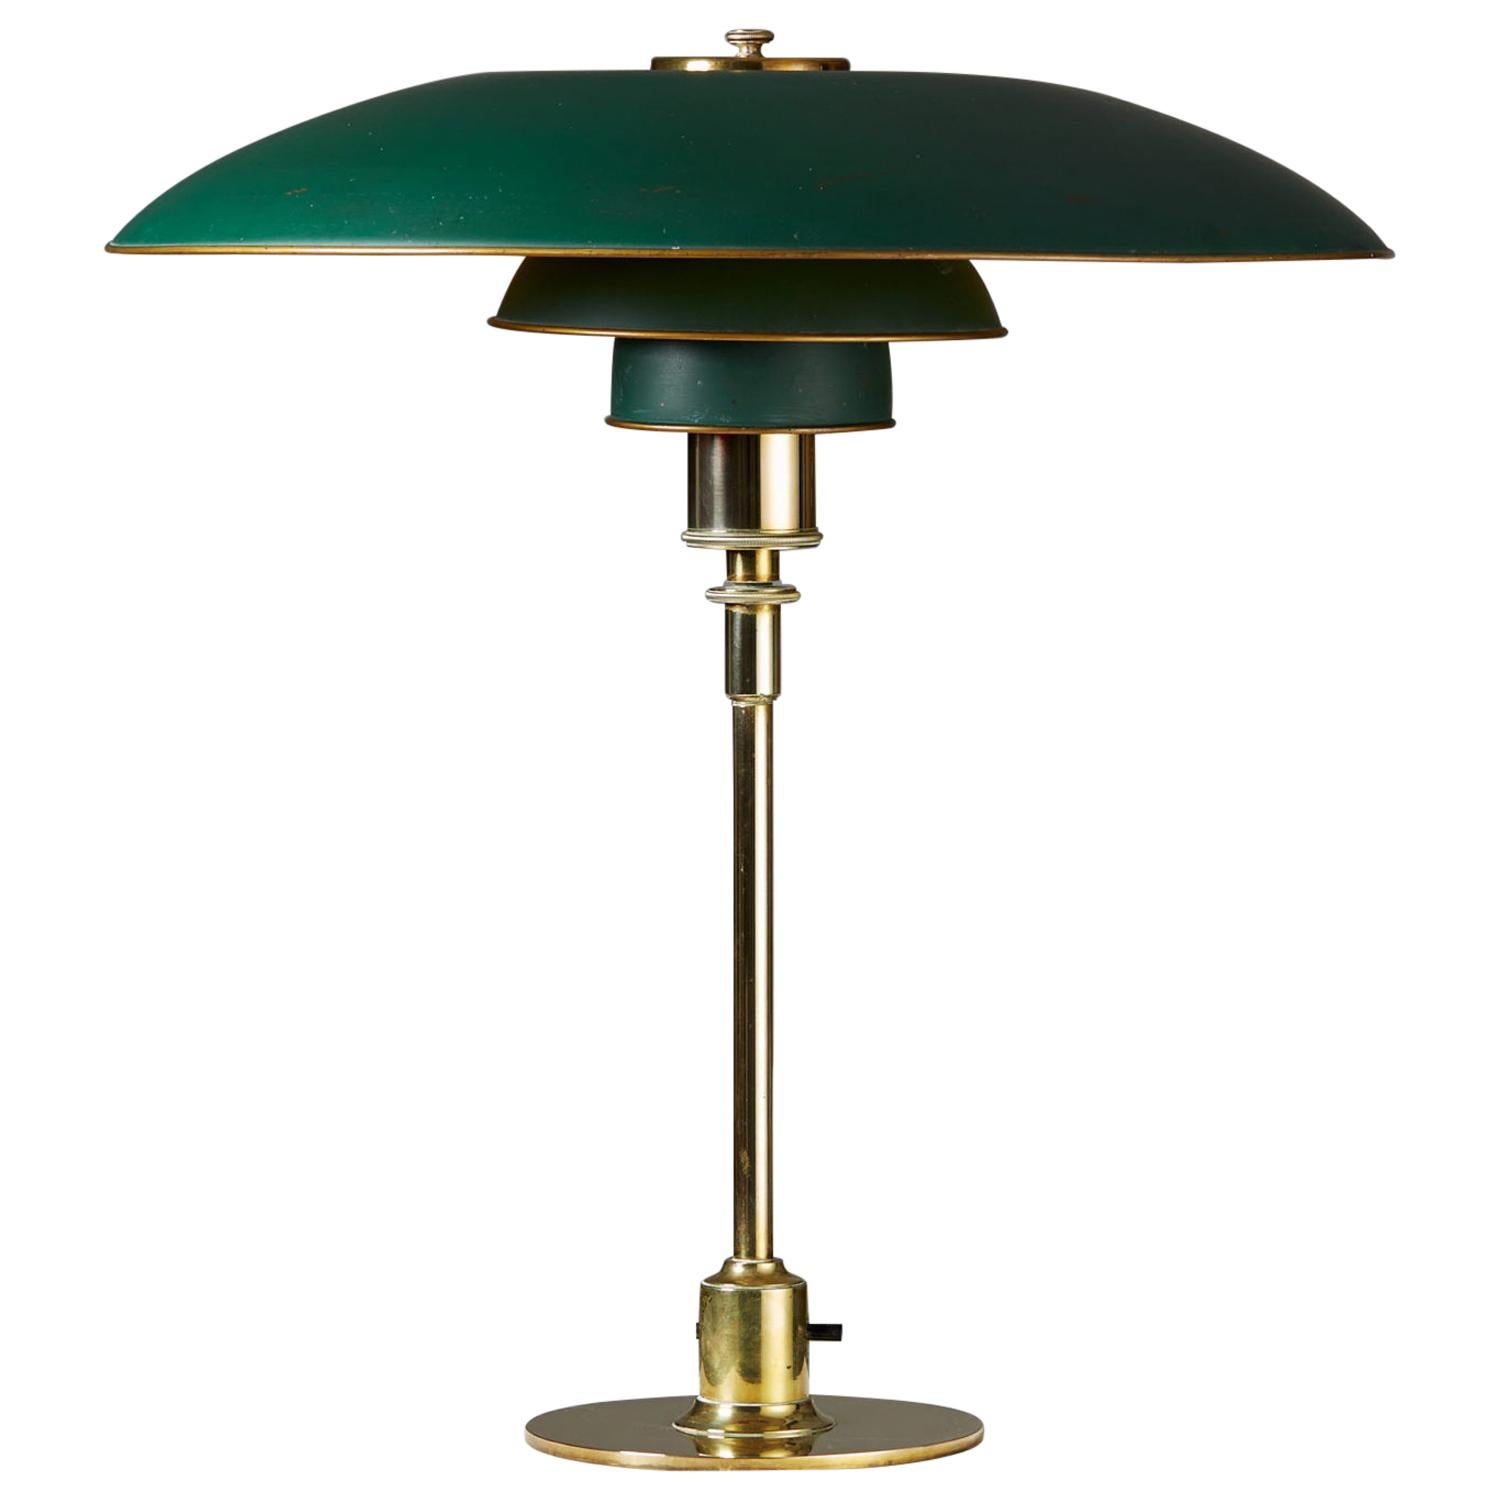 privatliv Faial Portico Table Lamp PH 5/3, Designed by Poul Henningsen, Denmark, 1926-1927 at  1stDibs | ph lampa 1926, poul henningsen table lamp, ph5 table lamp